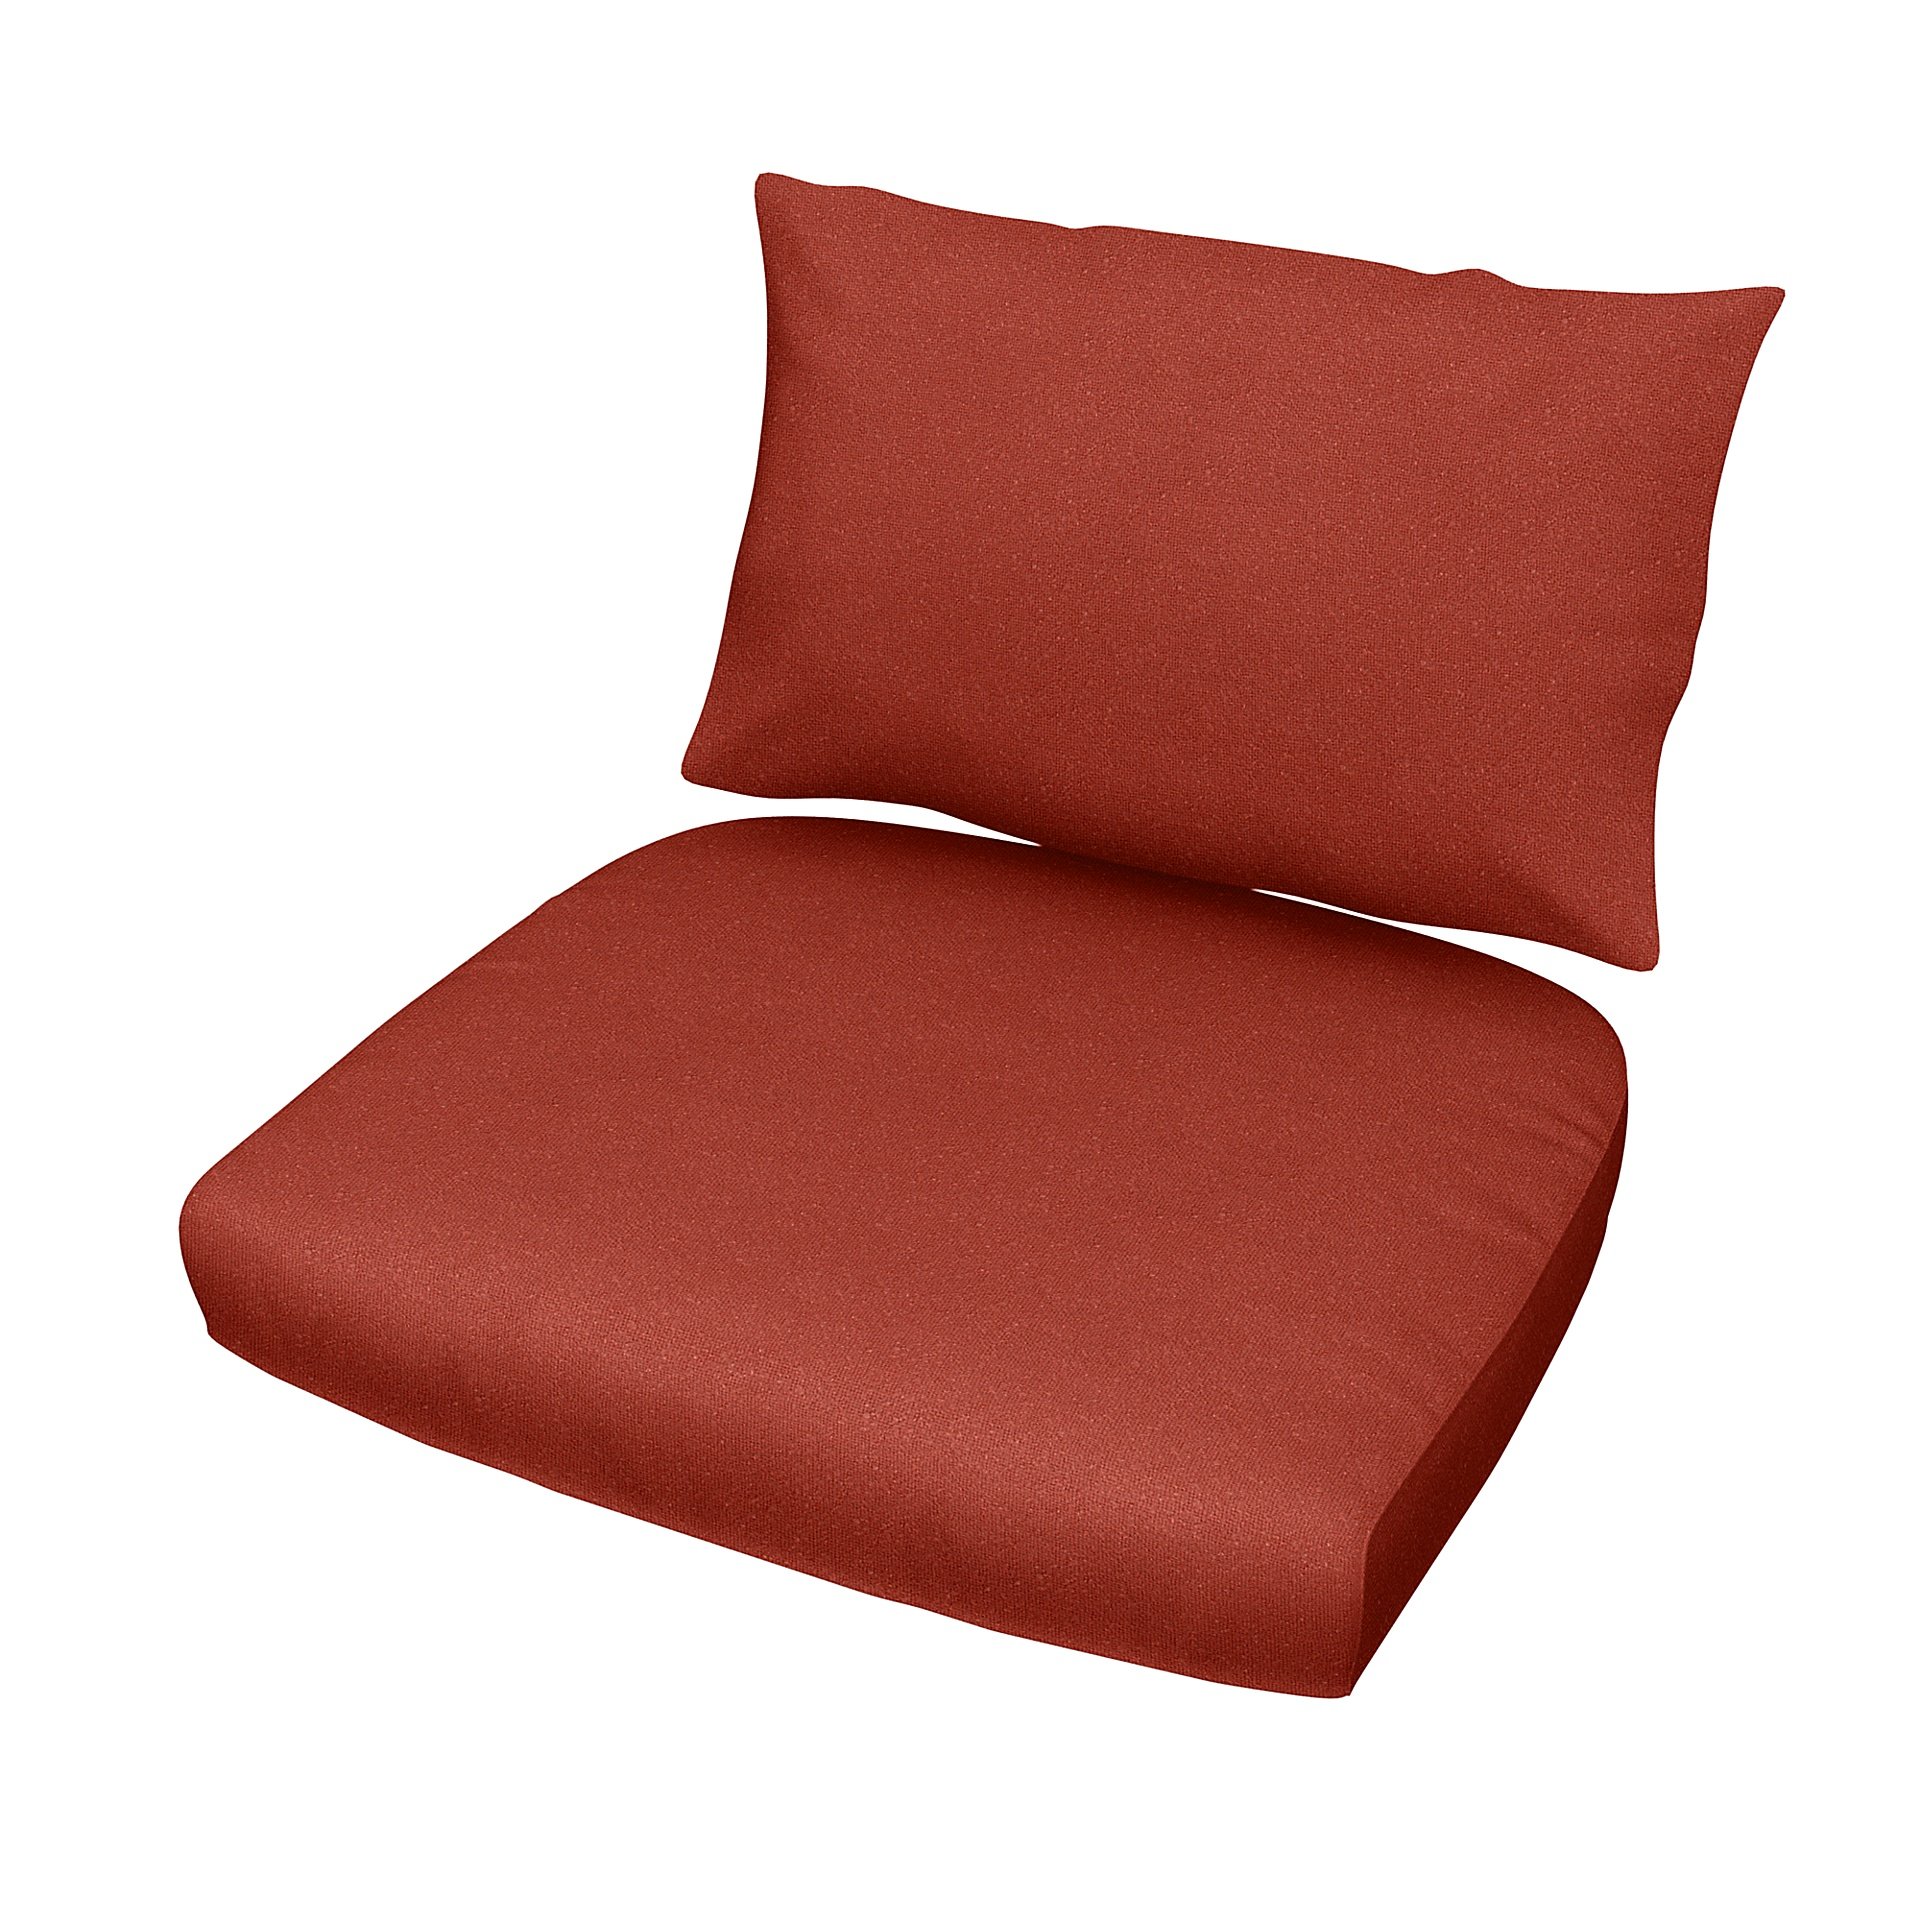 IKEA - Stockholm Rattan Chair Cushion Cover Set, Coral Red, Outdoor - Bemz